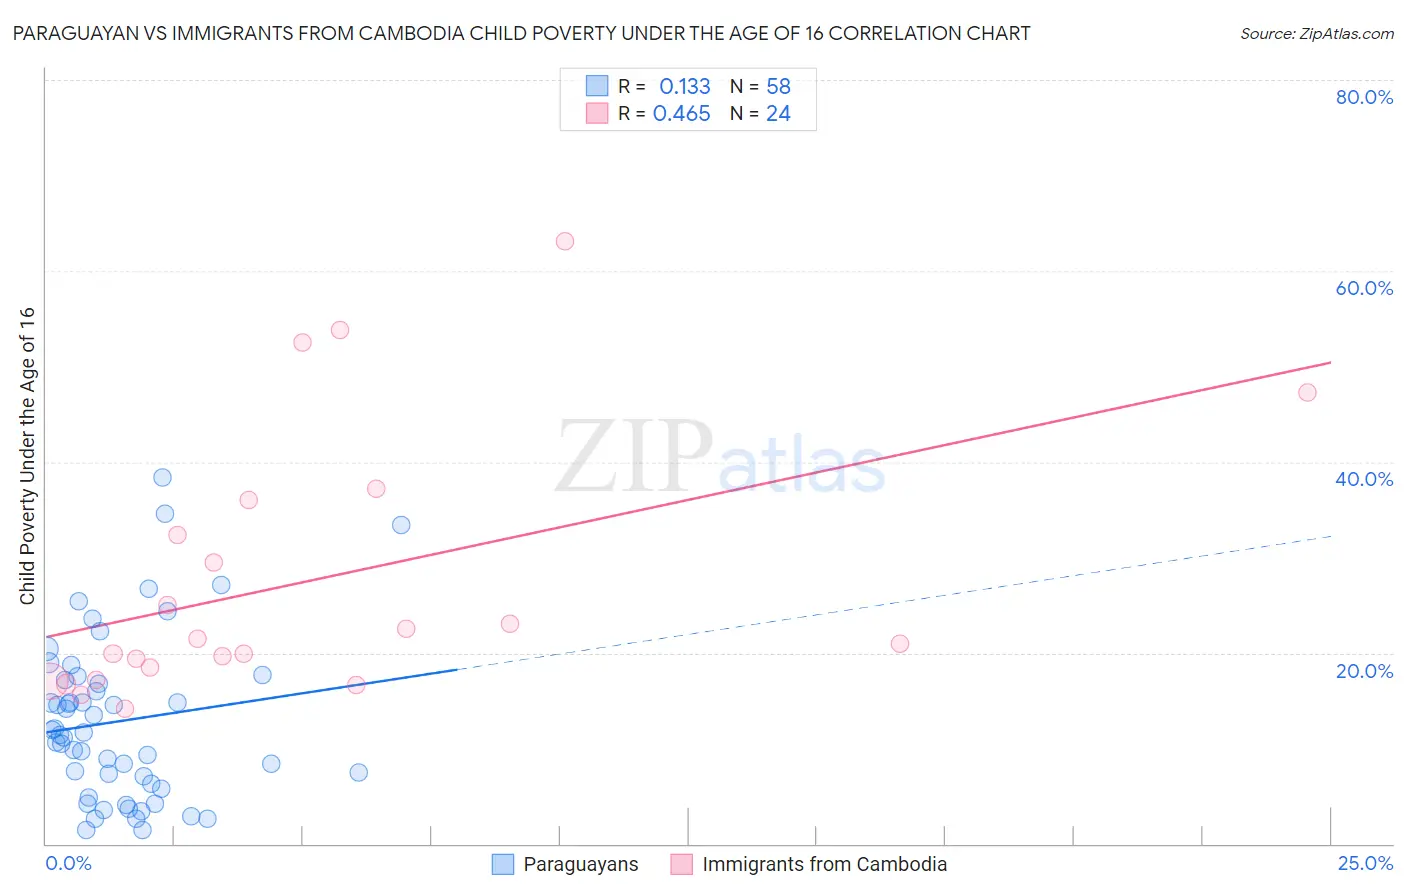 Paraguayan vs Immigrants from Cambodia Child Poverty Under the Age of 16